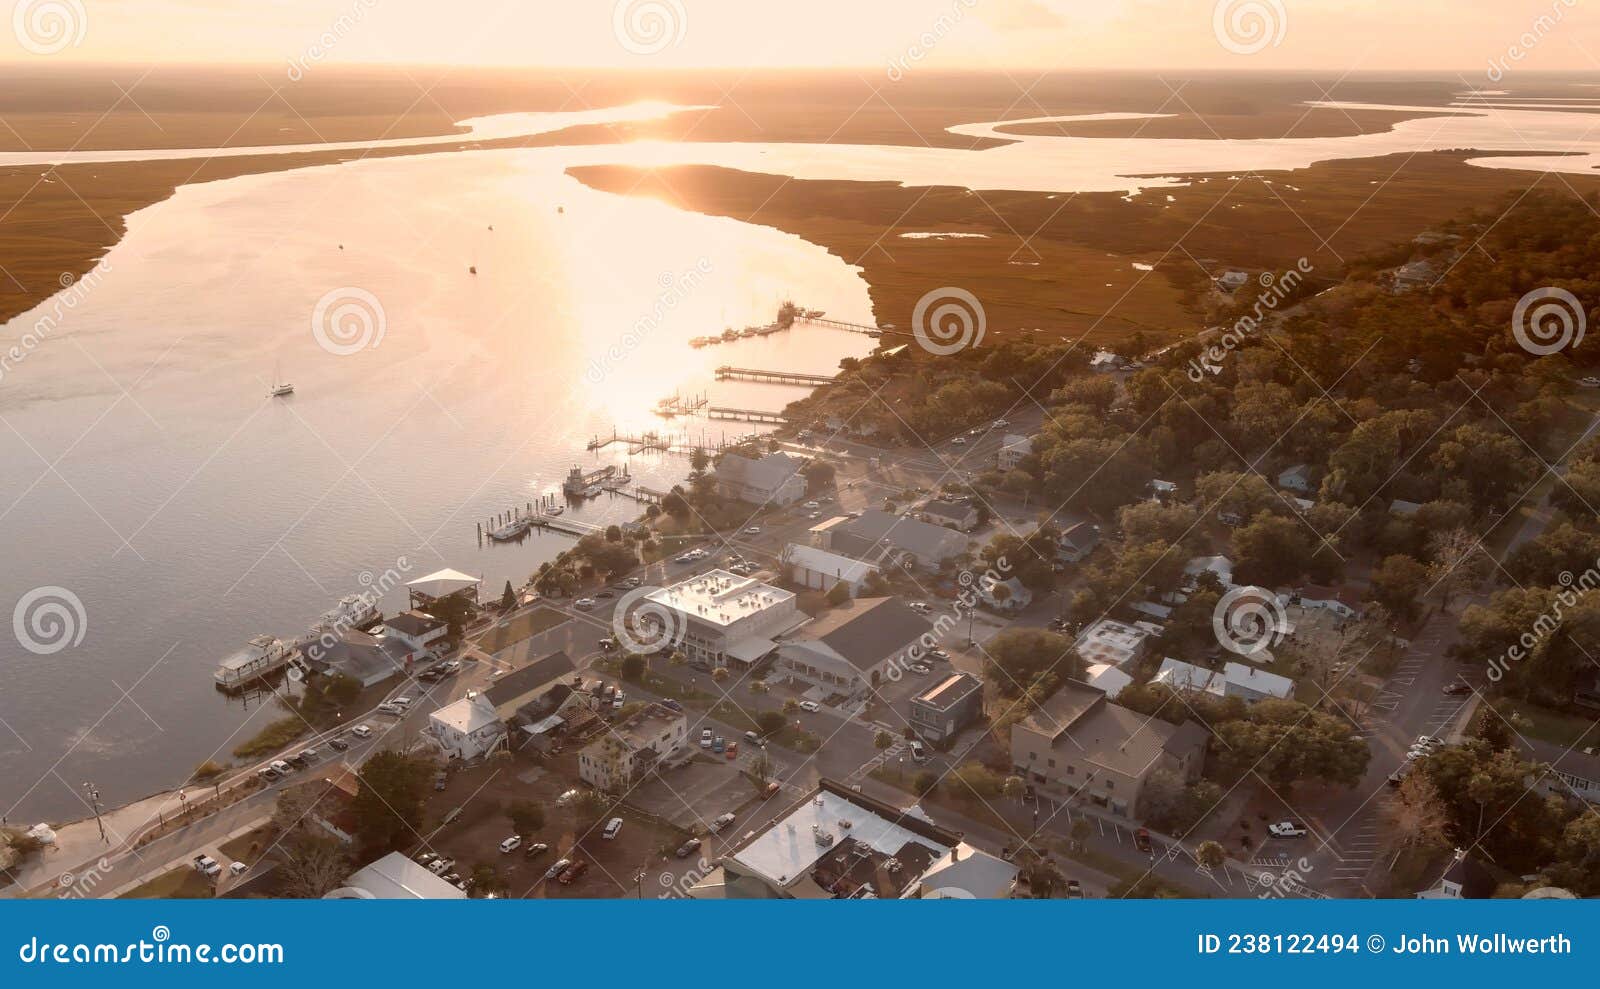 aerial view of st marys, georgia and the st marys river at sunset